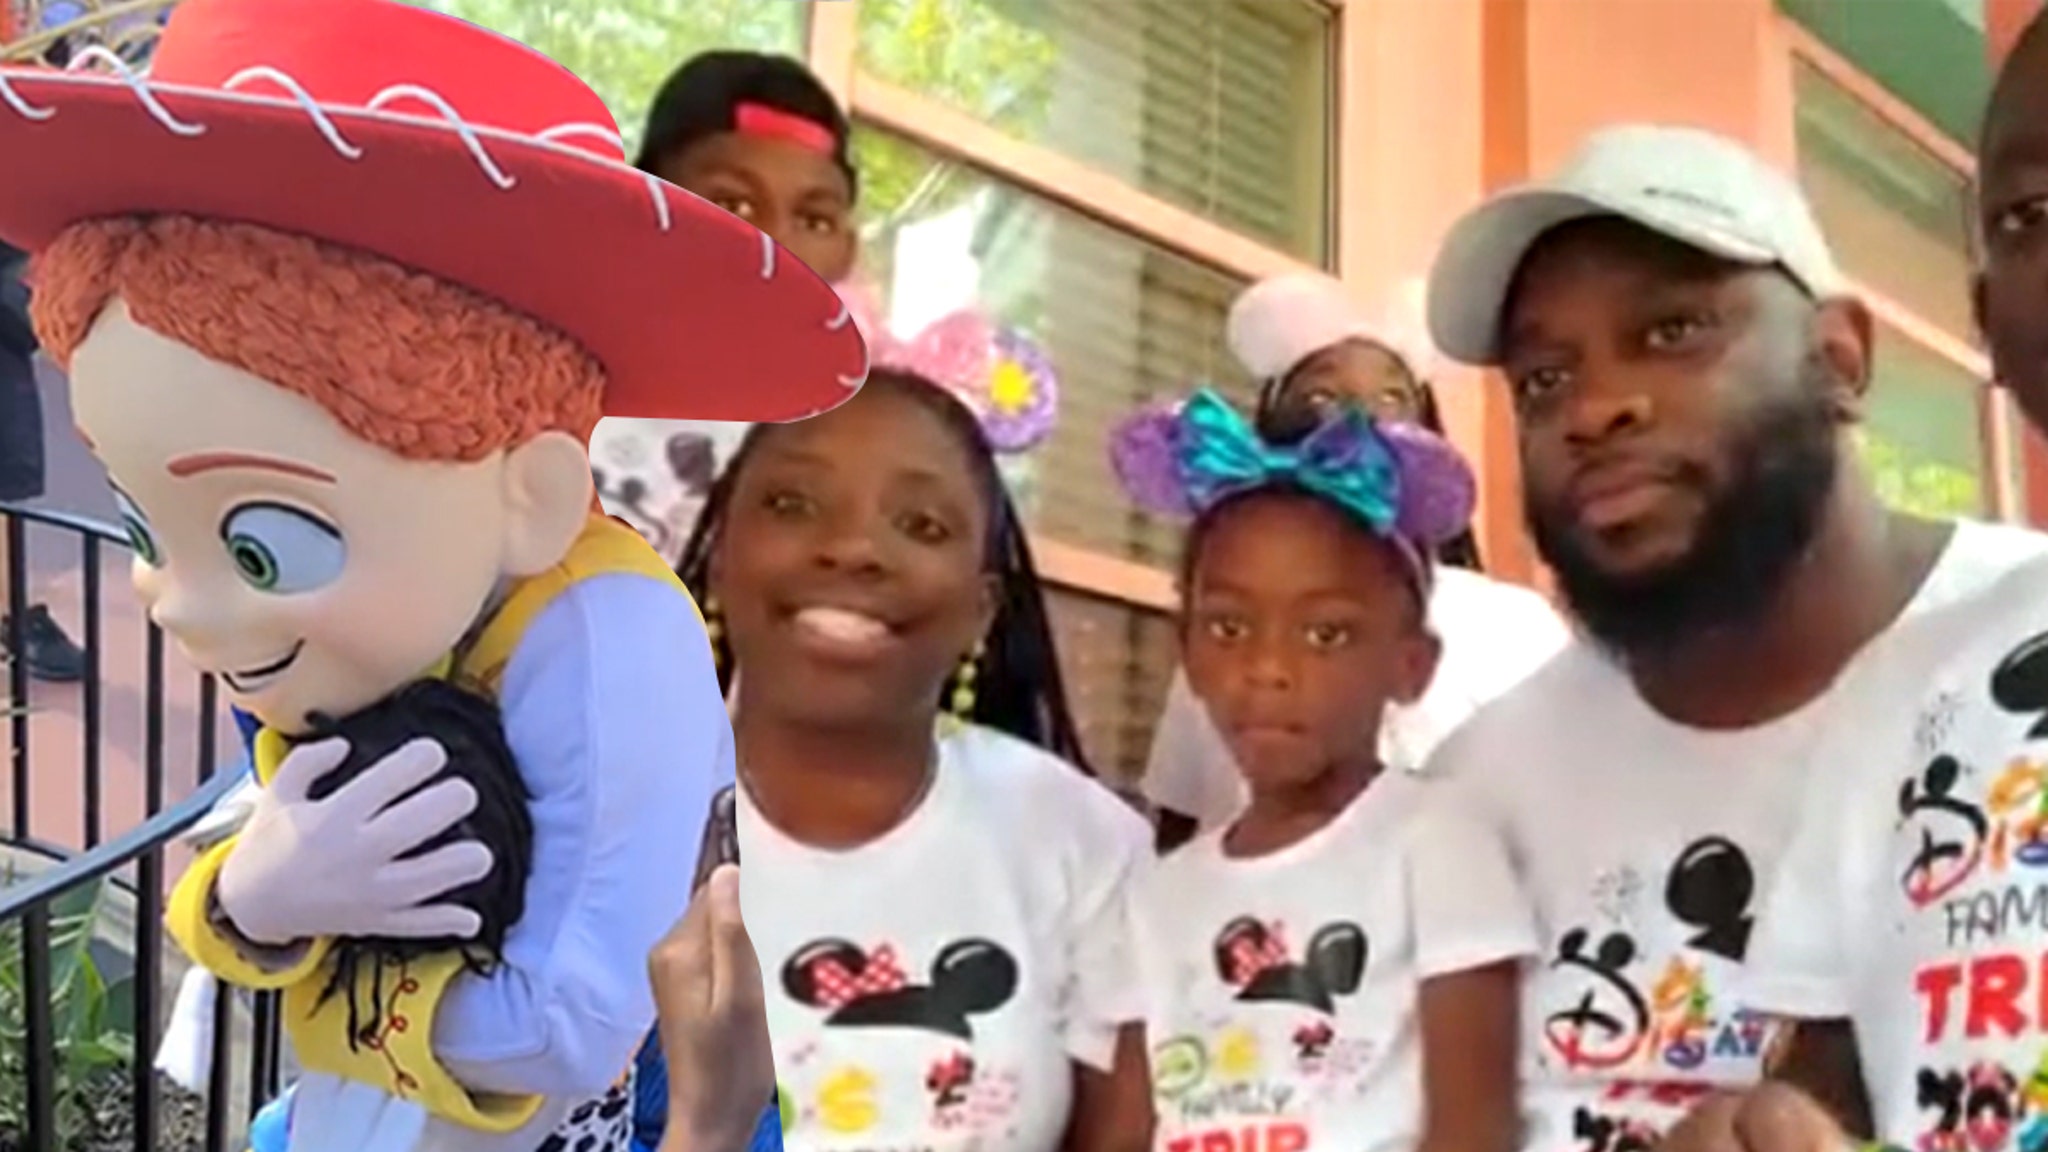 Family From Viral ‘Toy Story’ Hug Says Characters Should Embrace Kids of All Races